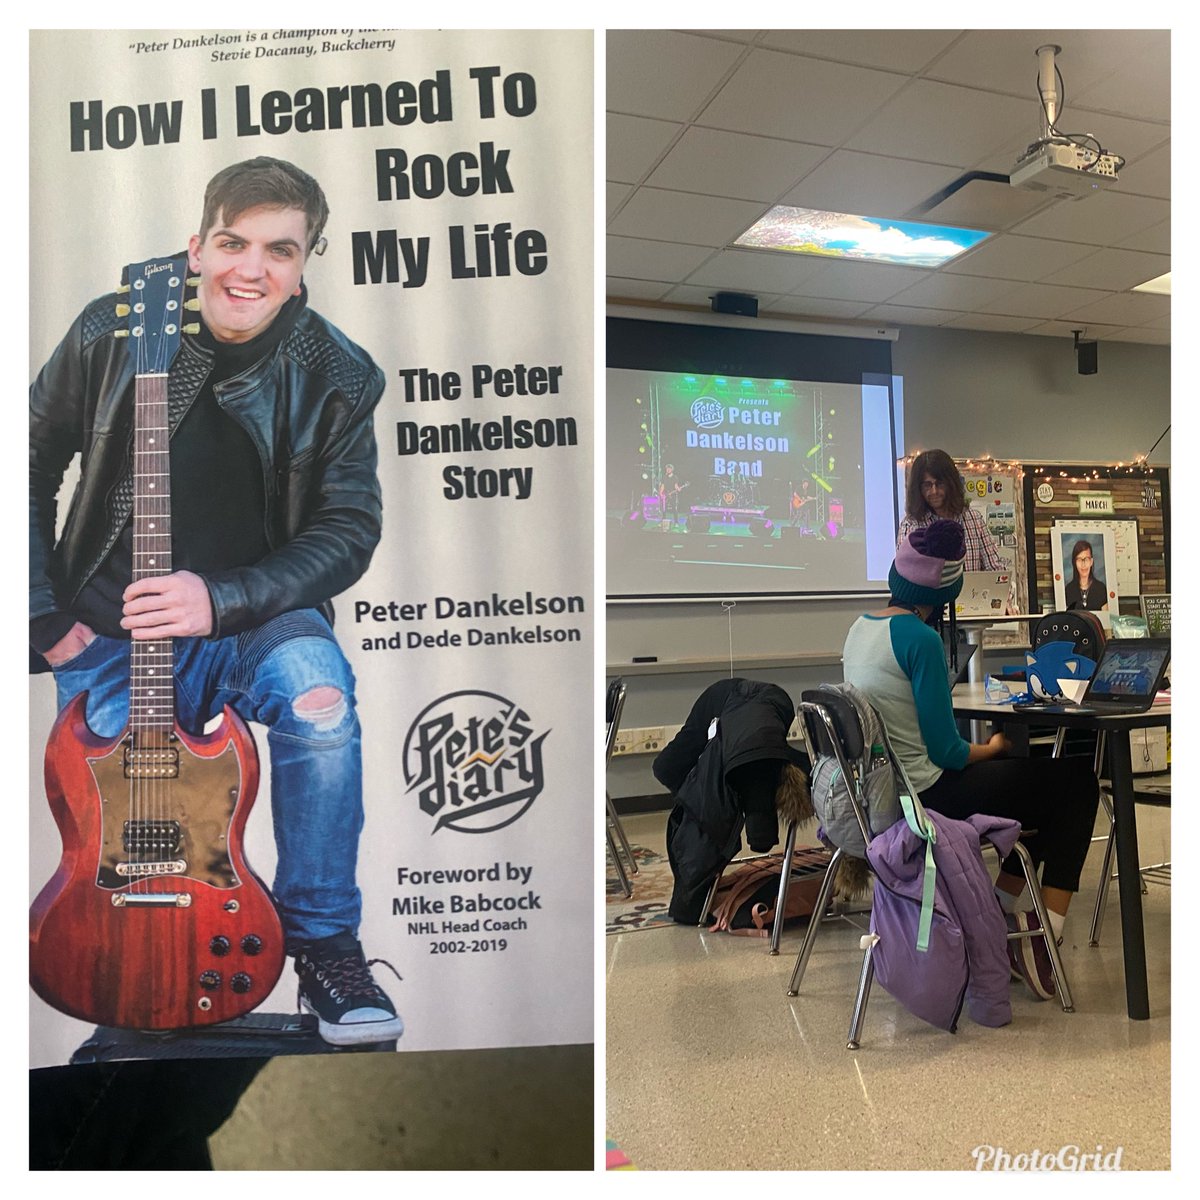 We are so excited to be starting Peter Dankelson’s autobiography! Mr Ryan shared his first hand account of his friend and an inspiring story worth reading!  #gnhsreads #peterdankelson #d127getsreal